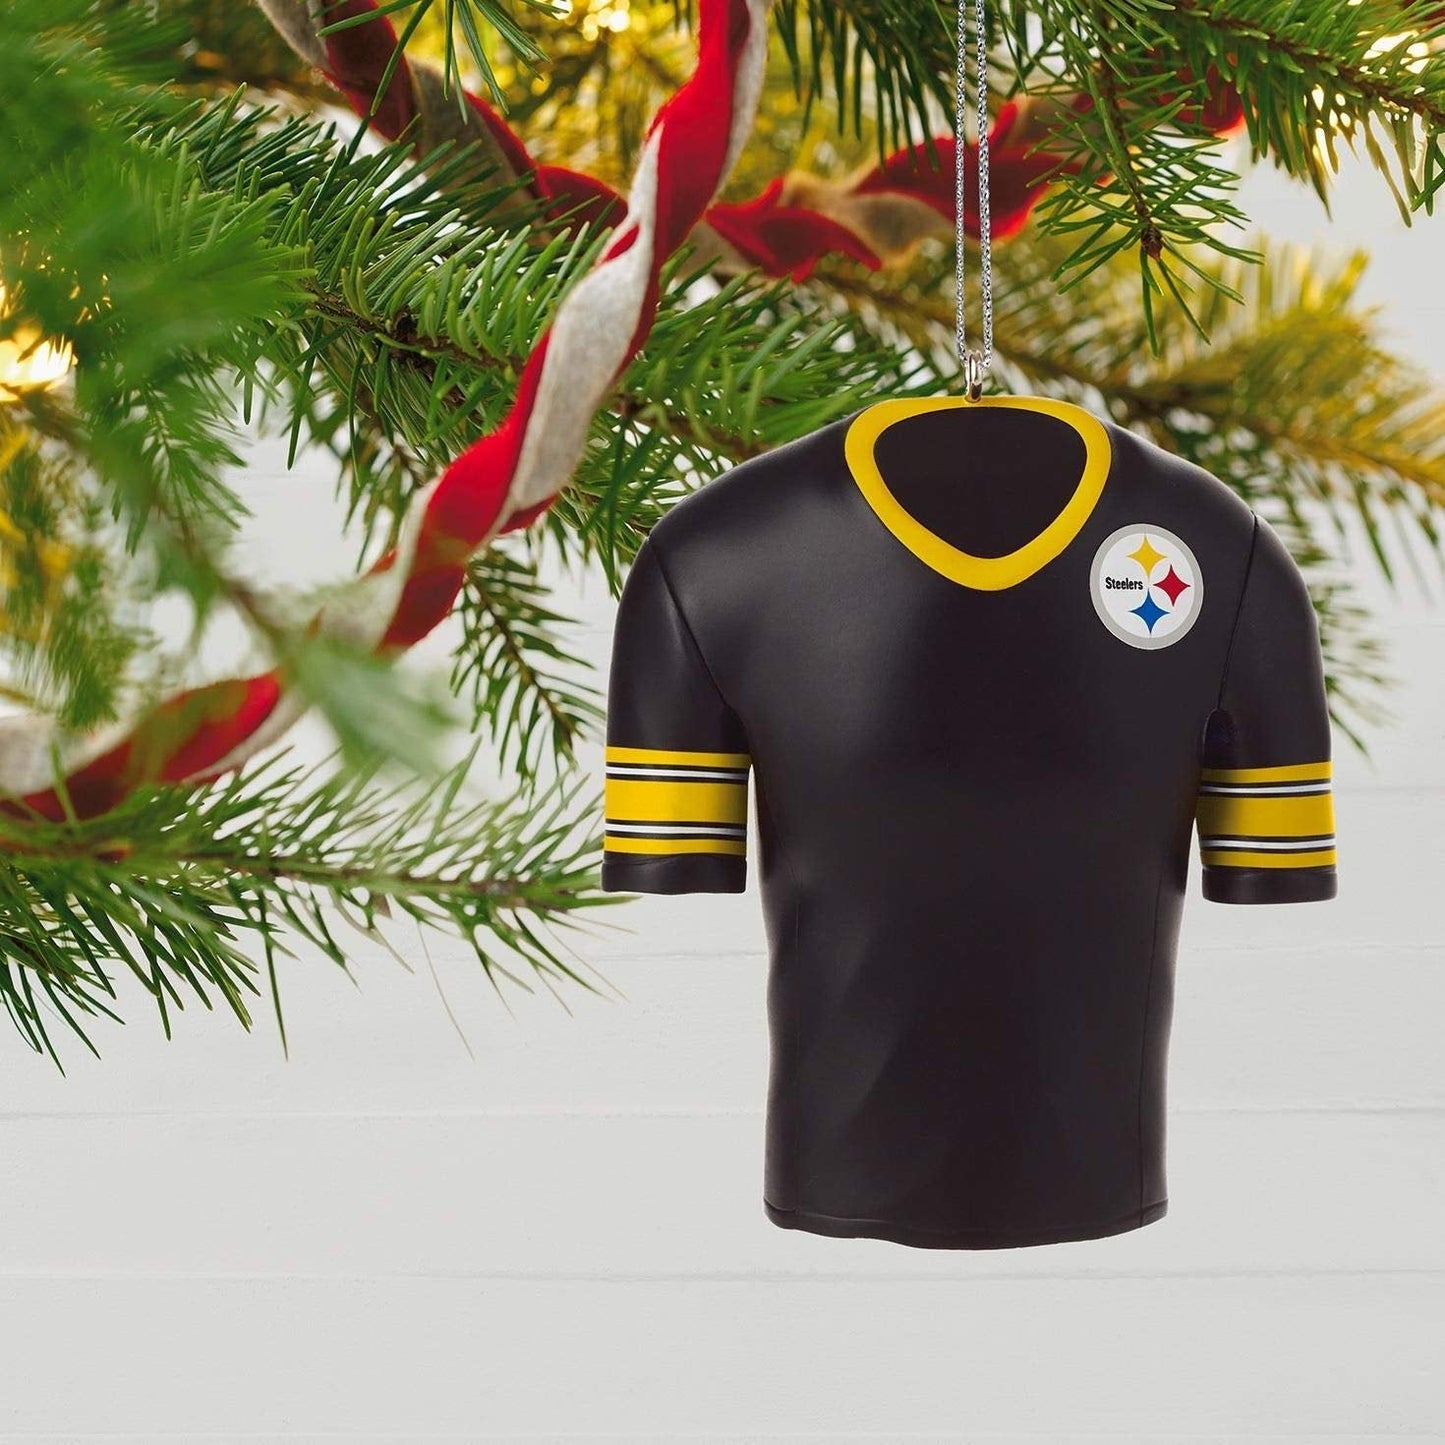 Hallmark Pittsburgh Steelers Jersey Ornament Sports & Activities,City & State